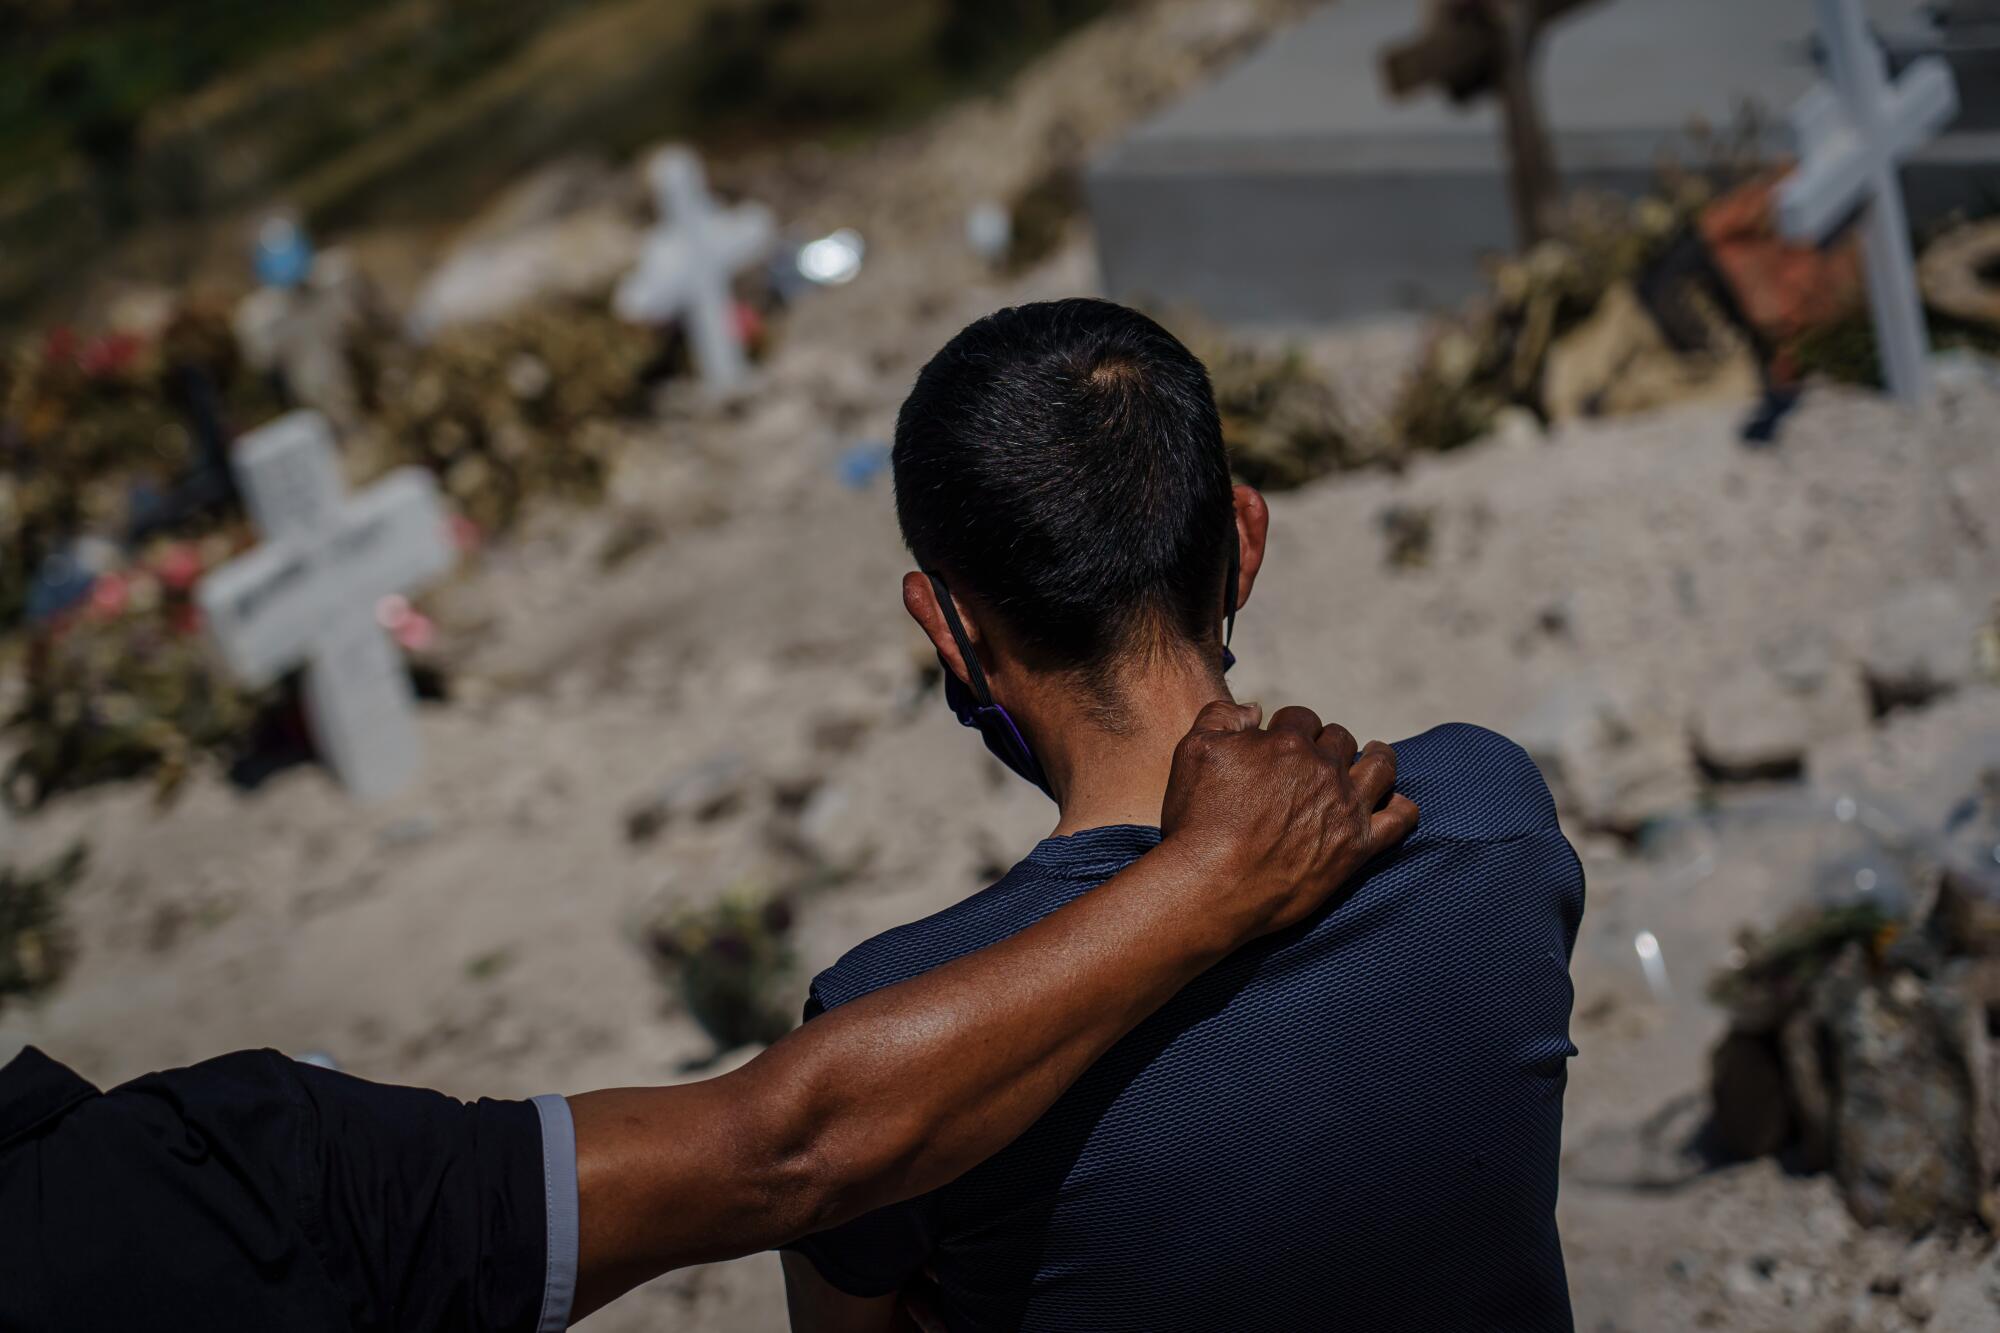 Dominguez Hernandez, left, tries his best to console Fredy Villa Suerte Hernandez, right, at a distance, as they mourn the death of Laura Moreno Sanchez, 49, Fredy's wife who passed away from COVID-19, at the municipal pantheon number 13 cemetery in Tijuana, Mexico, on April 25, 2020. Fredy Villa Suerte Hernandez said that he does not know for a fact that if he is actually burying the body of his wife. He claimed that authorities did not let him open the casket. She died after being hospitalized at the Tijuana General Hospital for 11 days for COVID-19. "I don't know if it is my wife or not. I did not see the body."